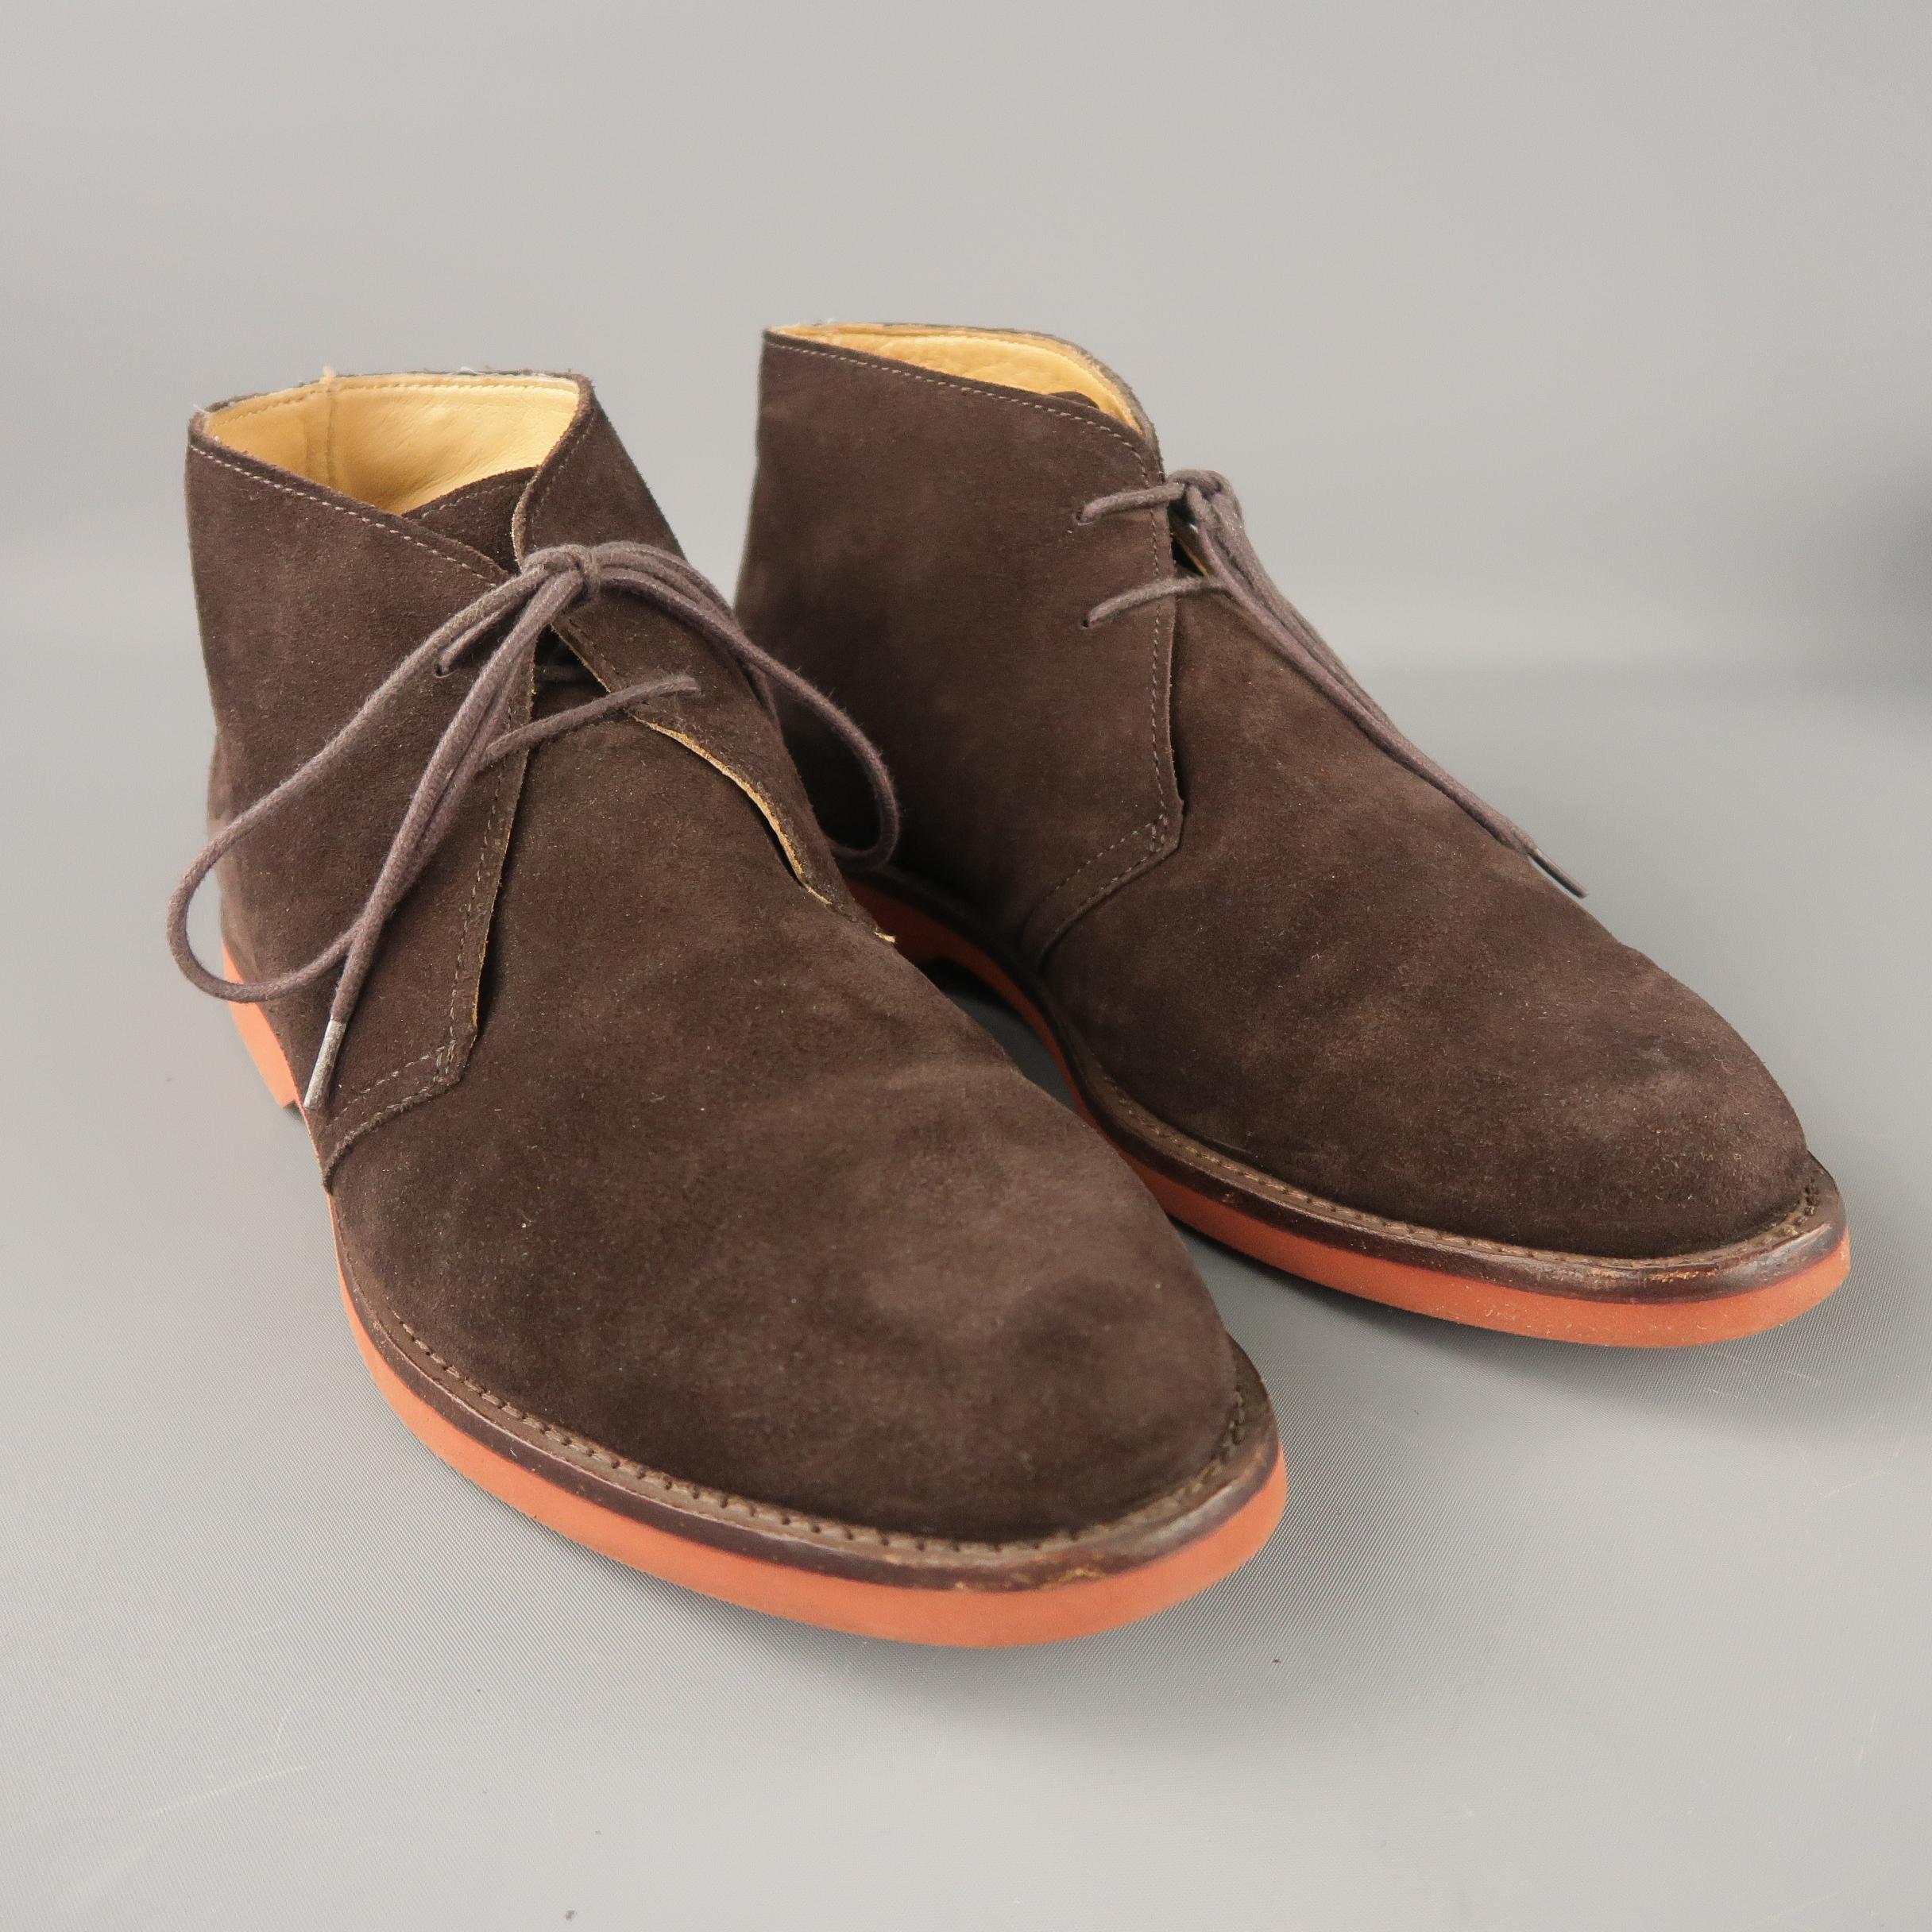 RALPH LAUREN chukka boot comes in a brown suede featuring a brick sole.
 
Very Good Pre-Owned Condition.
Marked: 11 D
 
Measurements:
 
Length: 12.5 in.
Height : 5.5 in.
Width: 4.9 in.